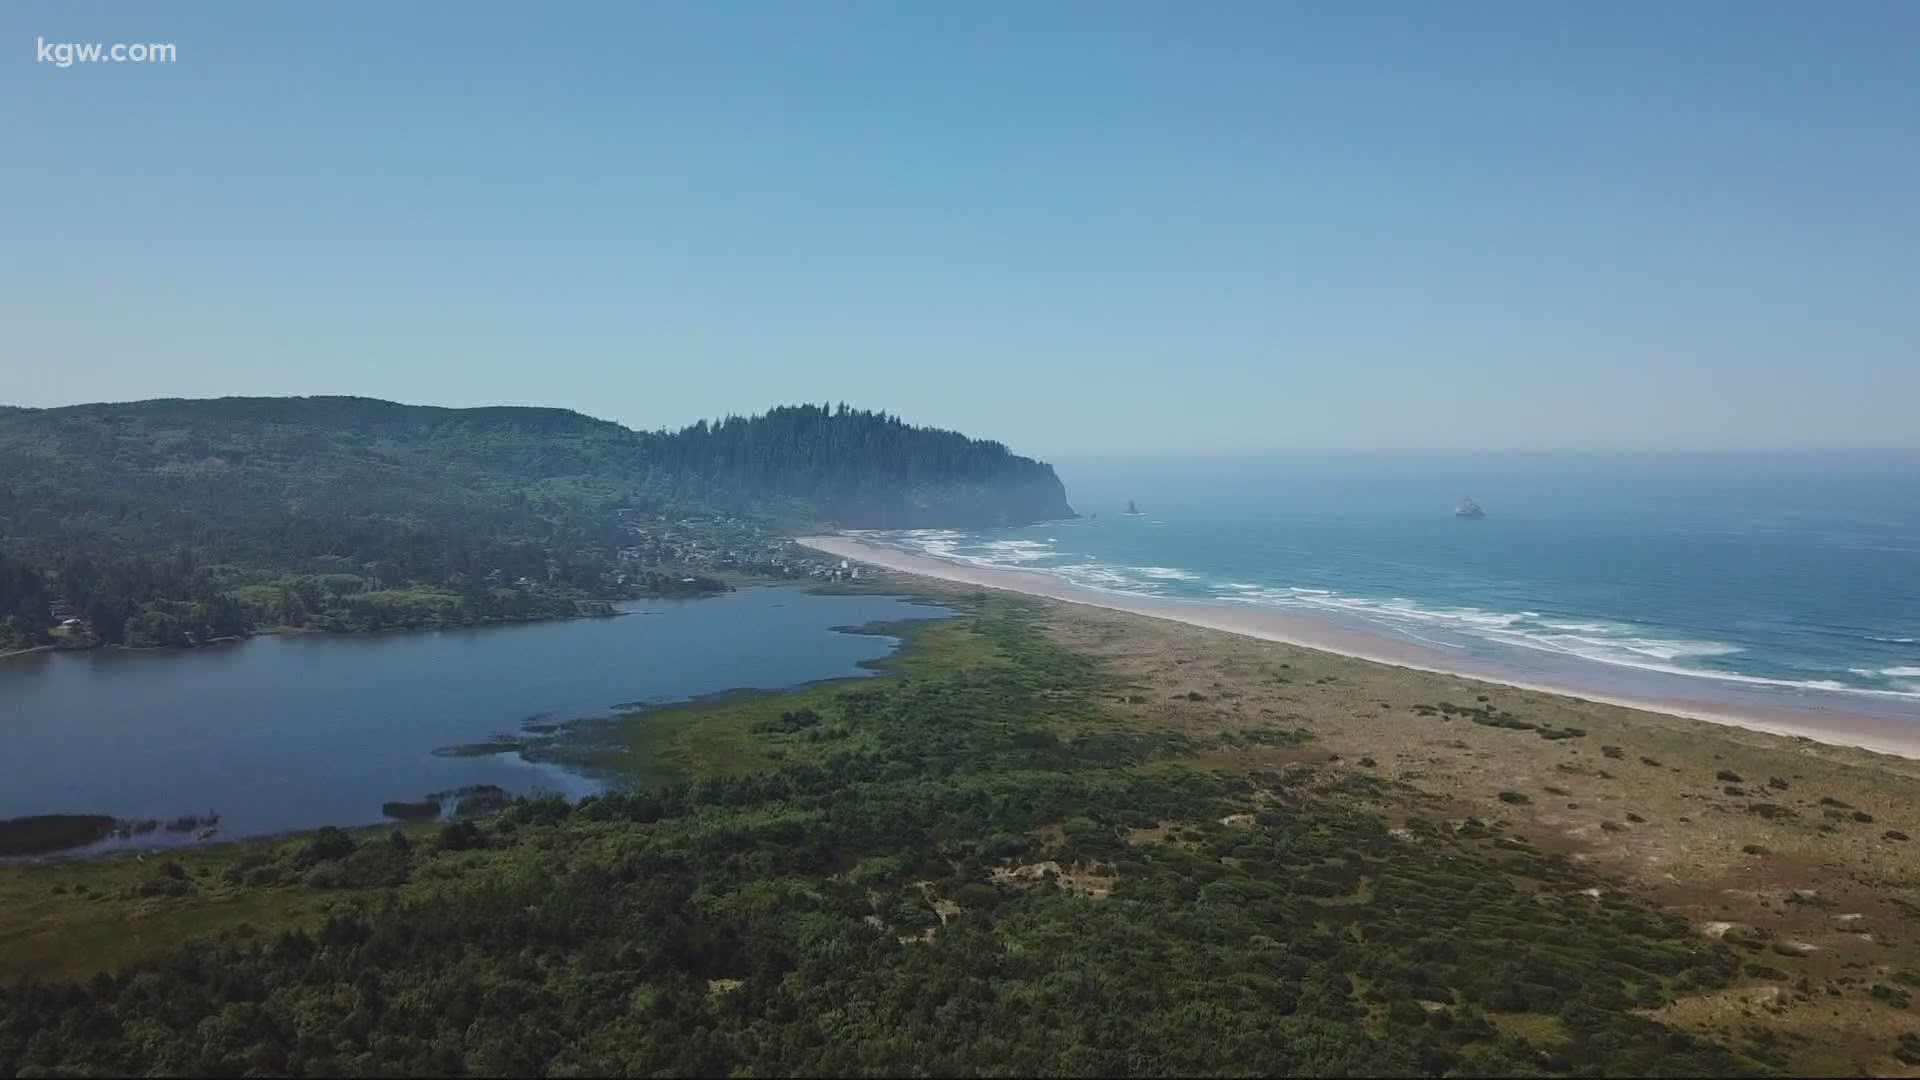 Grant McOmie takes us on a scenic drive, “Somewhere in Oregon.”